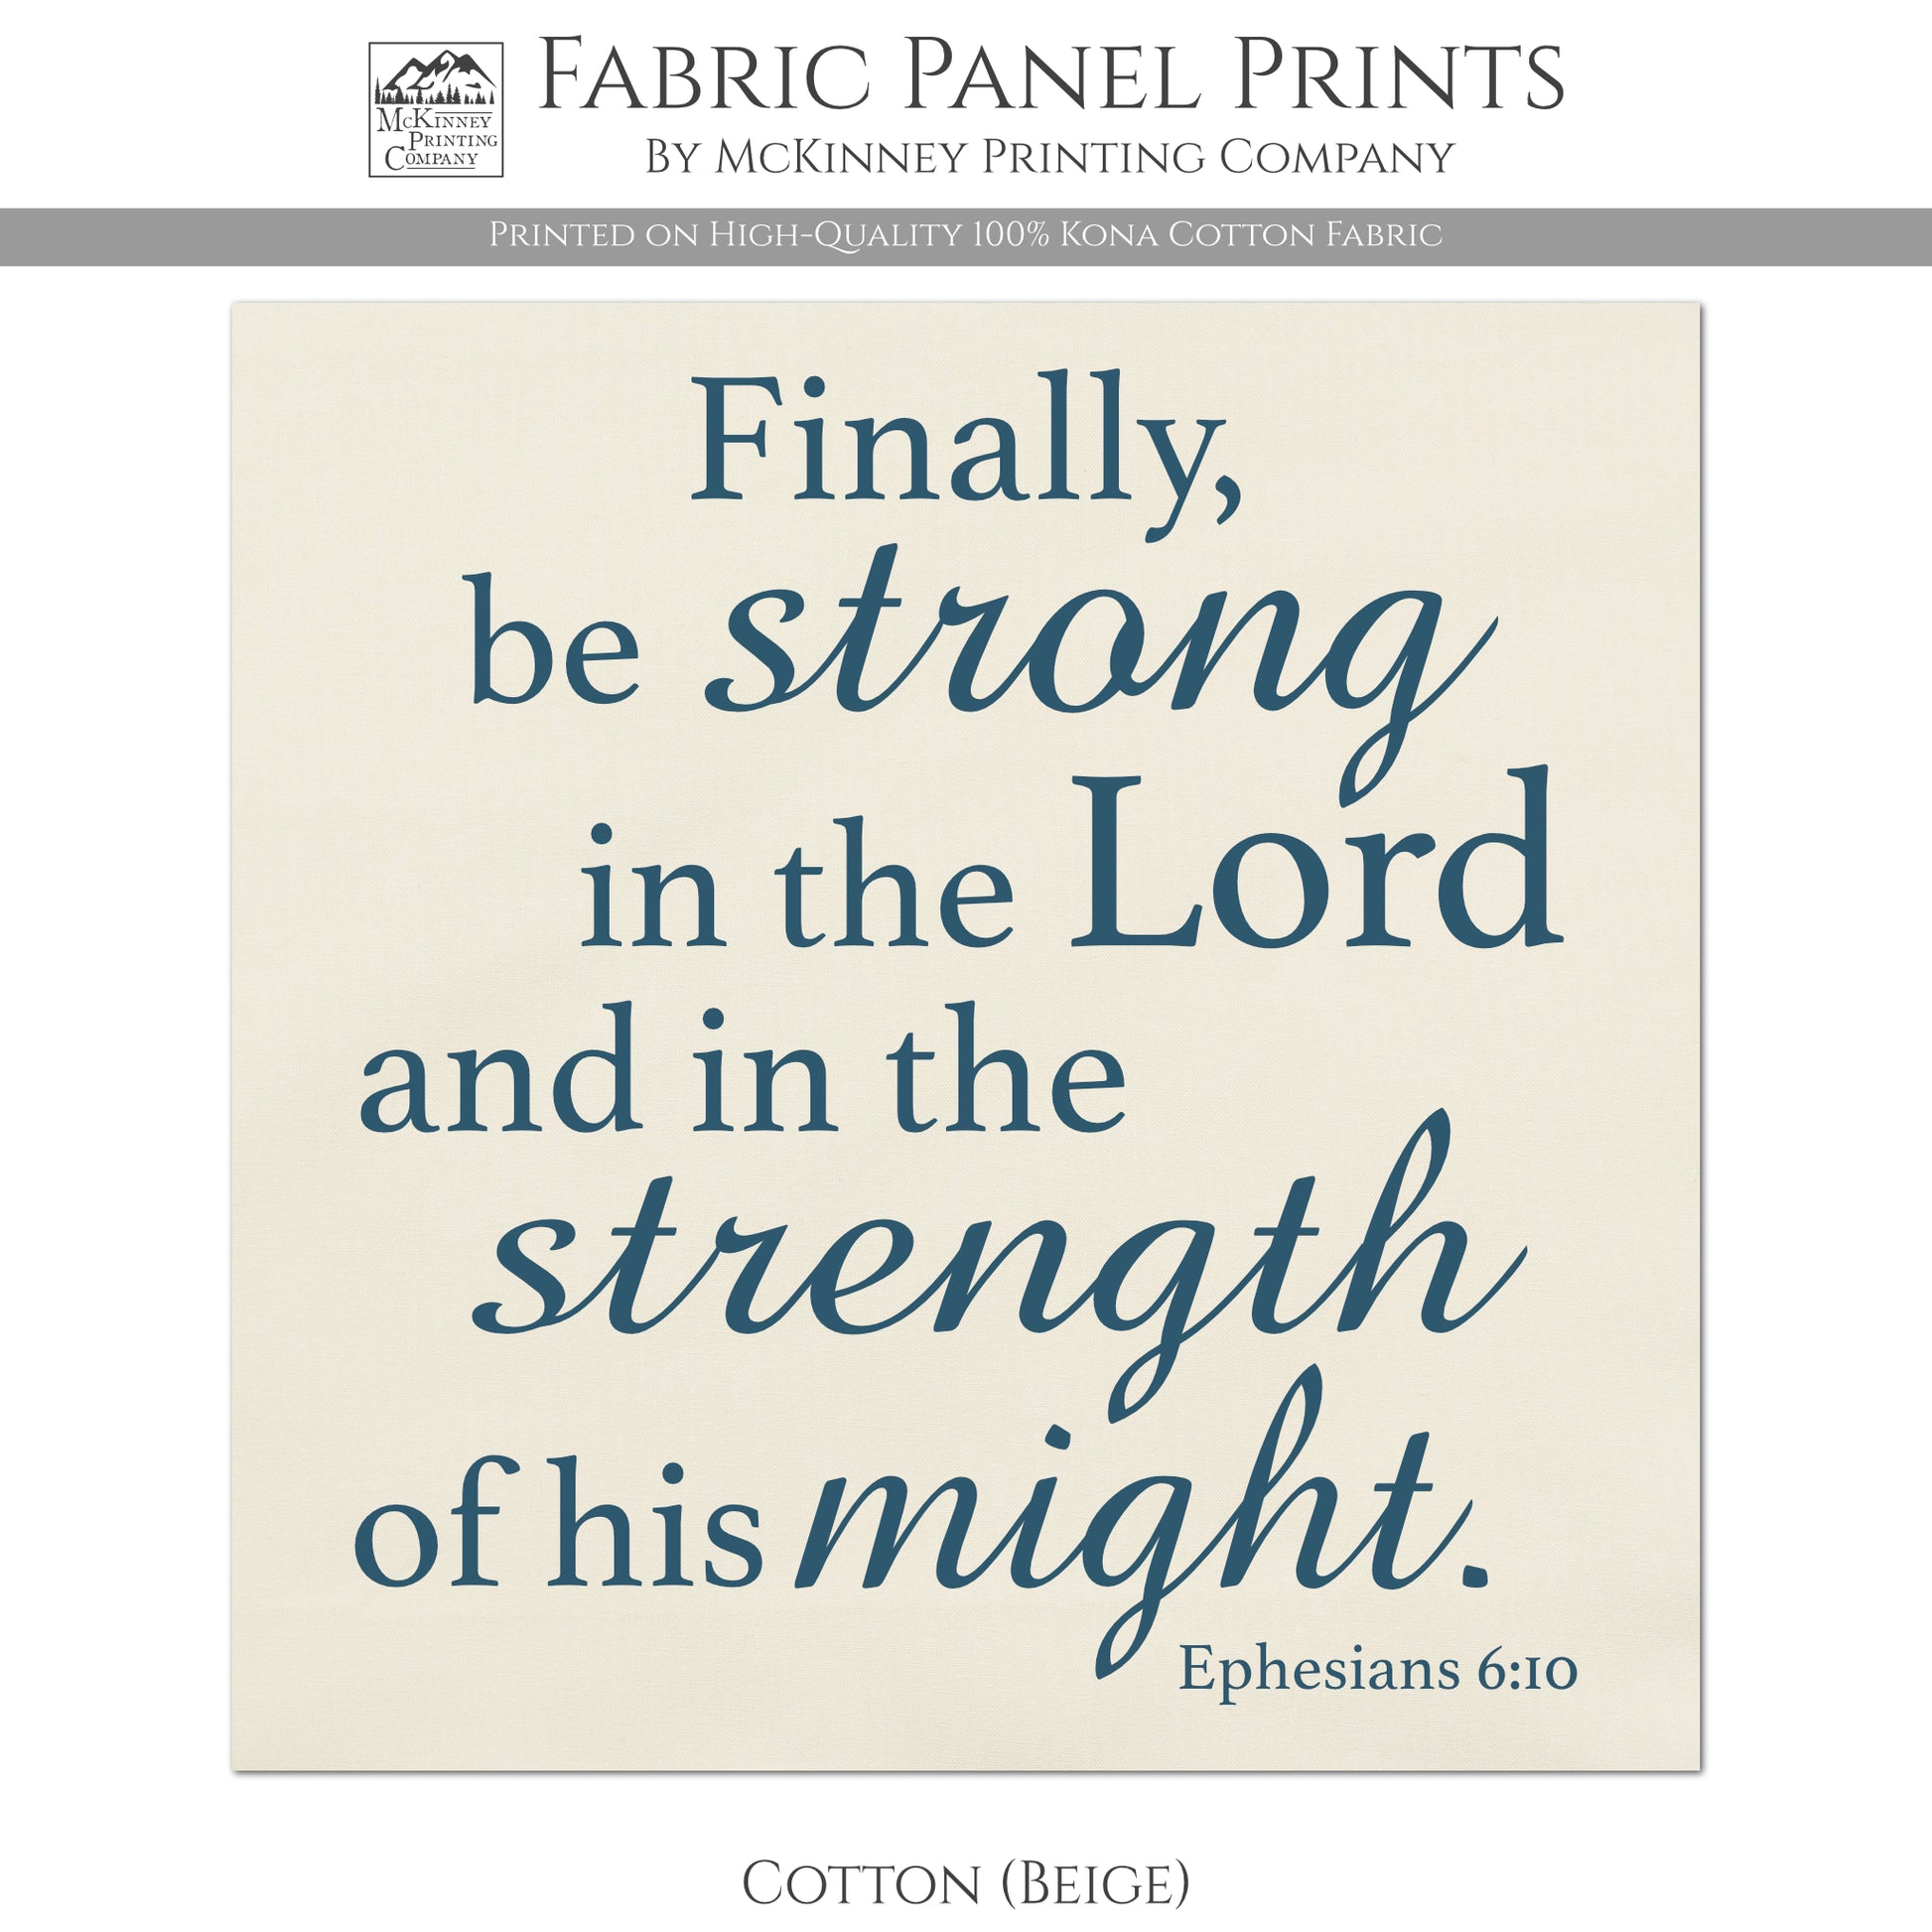 Finally be strong in the Lord and in the strength of his might - Ephesians 6:10 - Fabric Panel Print - Kona Cotton Fabric